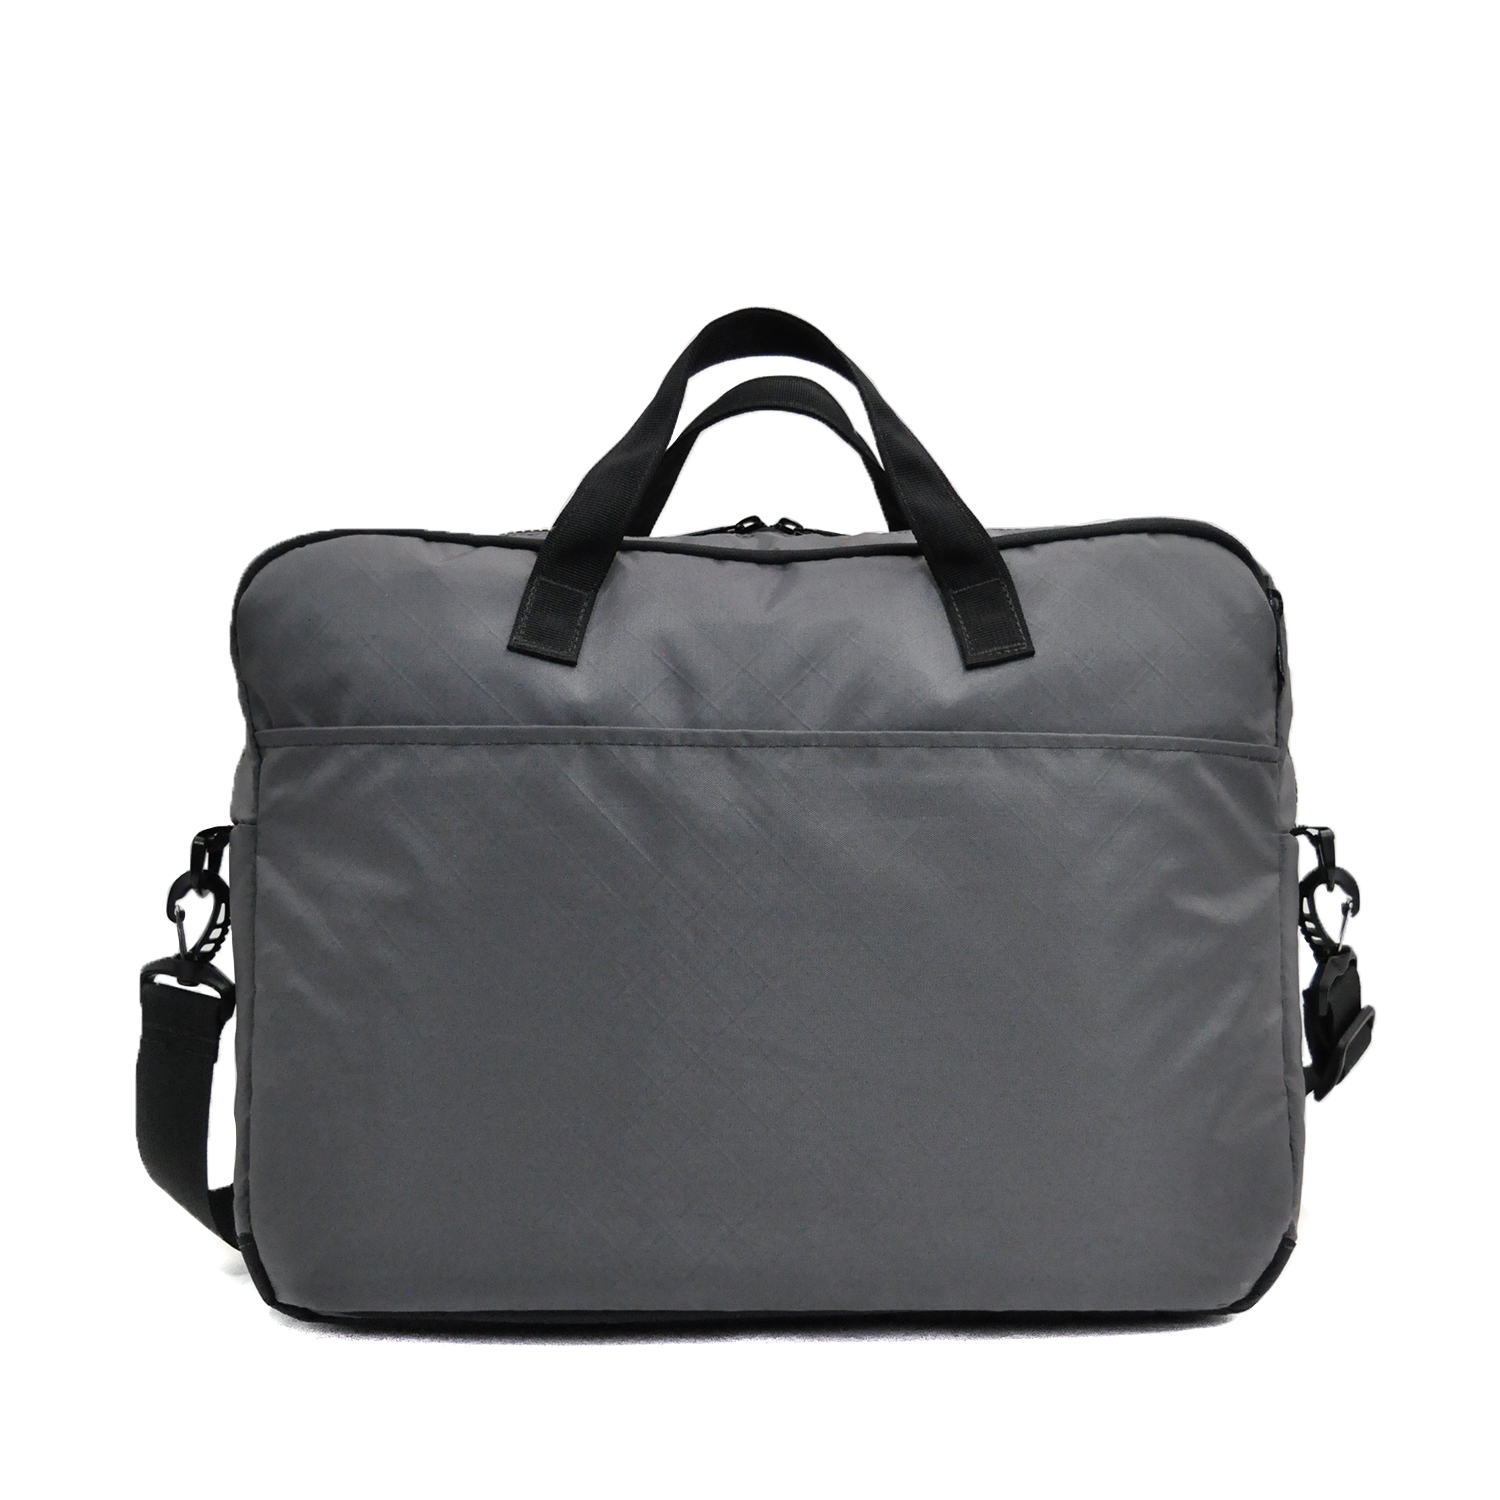 Flowfold Expedition Briefcase